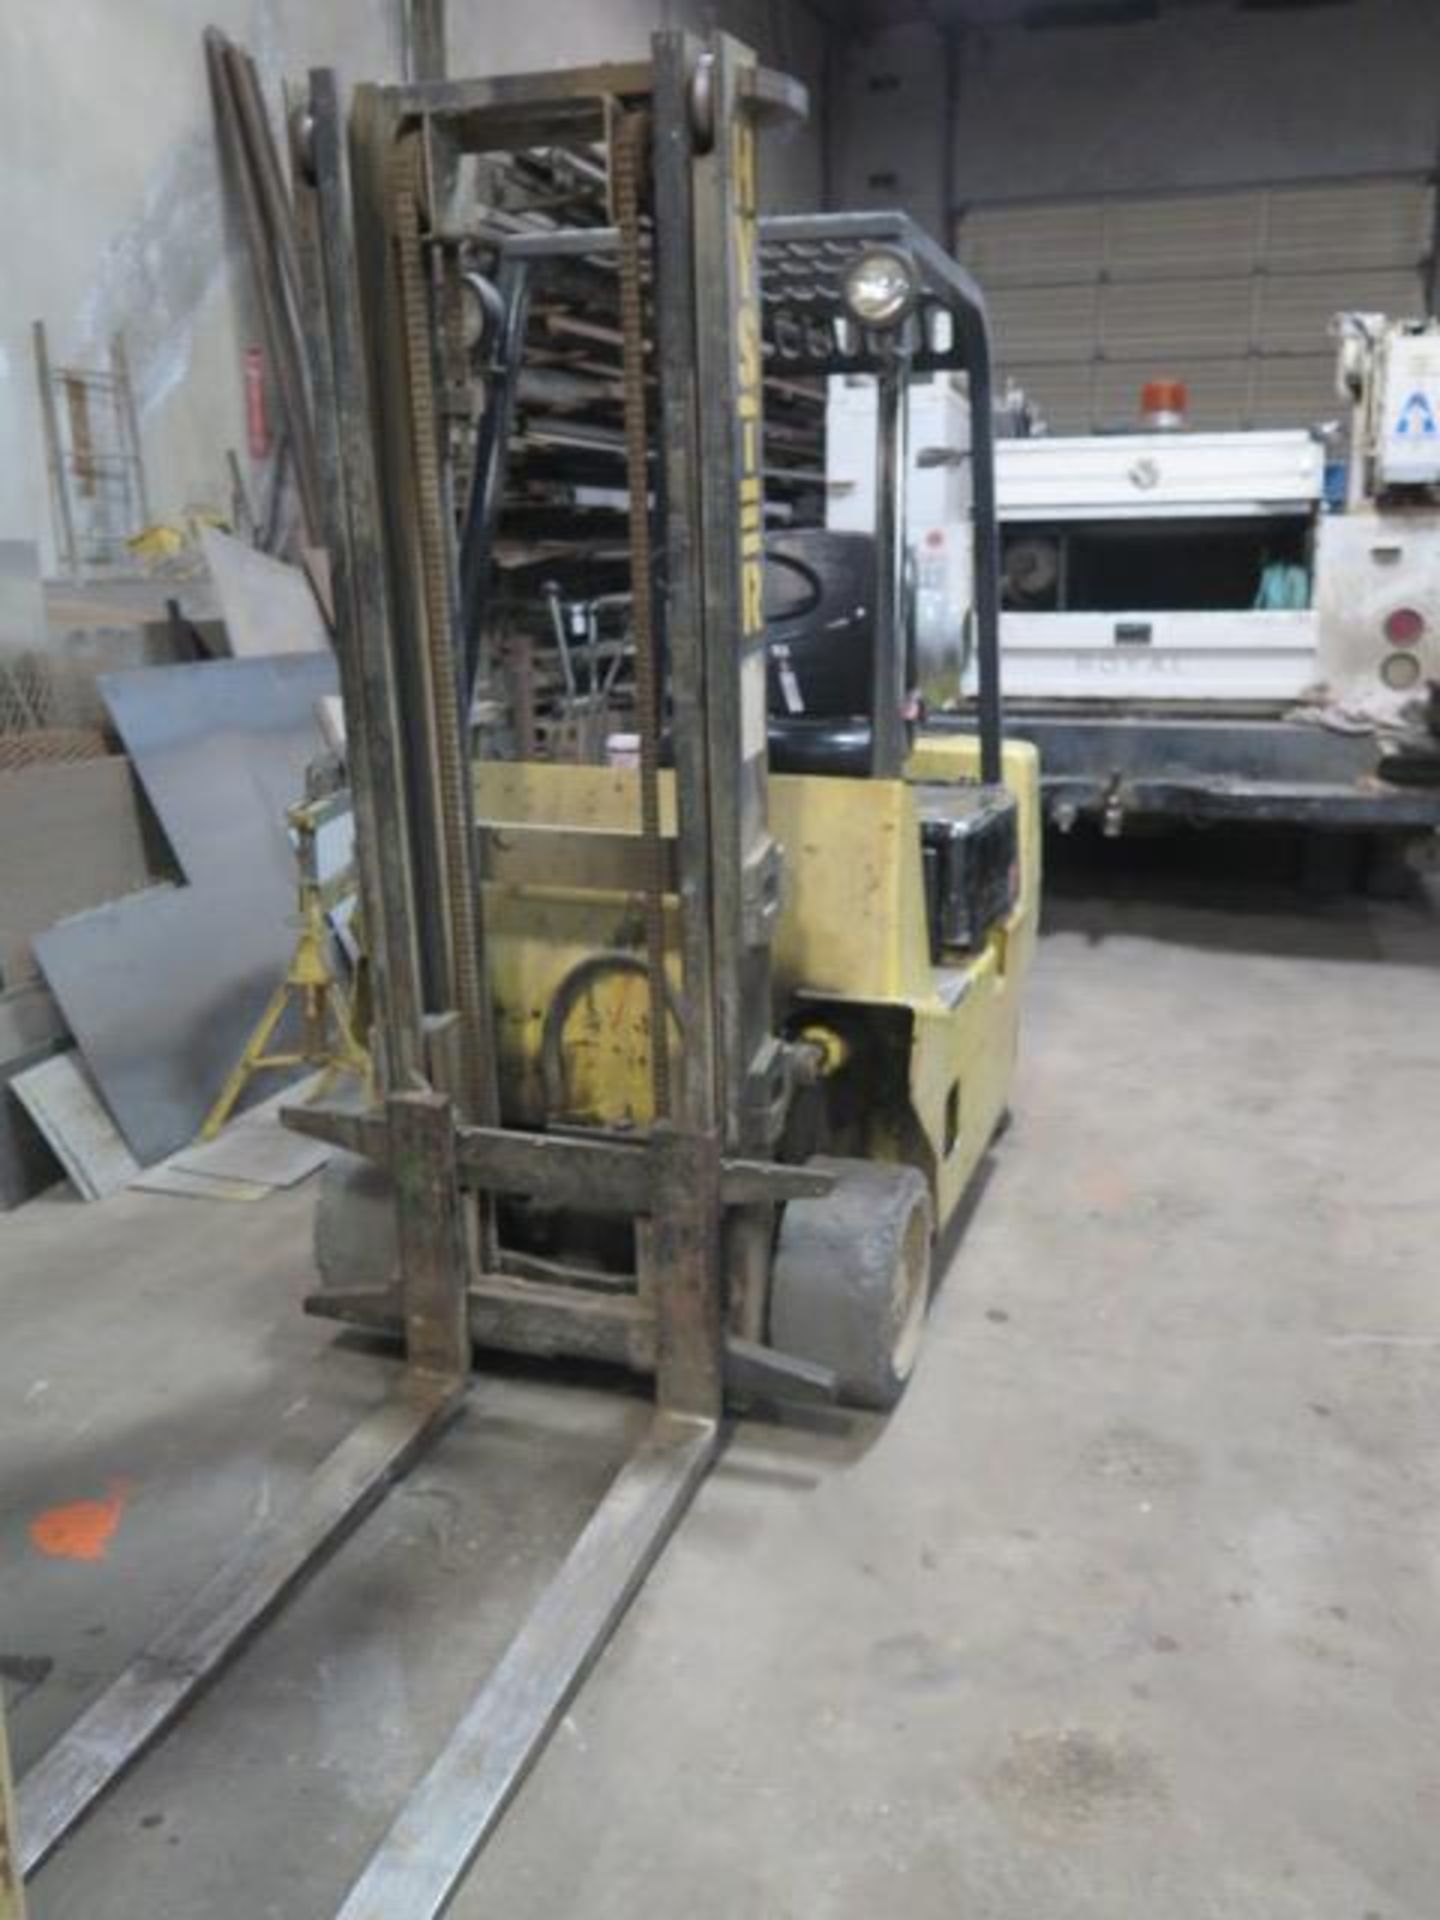 Hyster 50 5000 Lb Cap LPG Forklift w/ 2-Stage Mast, Cushion Tires (SOLD AS-IS - NO WARRANTY) - Image 4 of 10